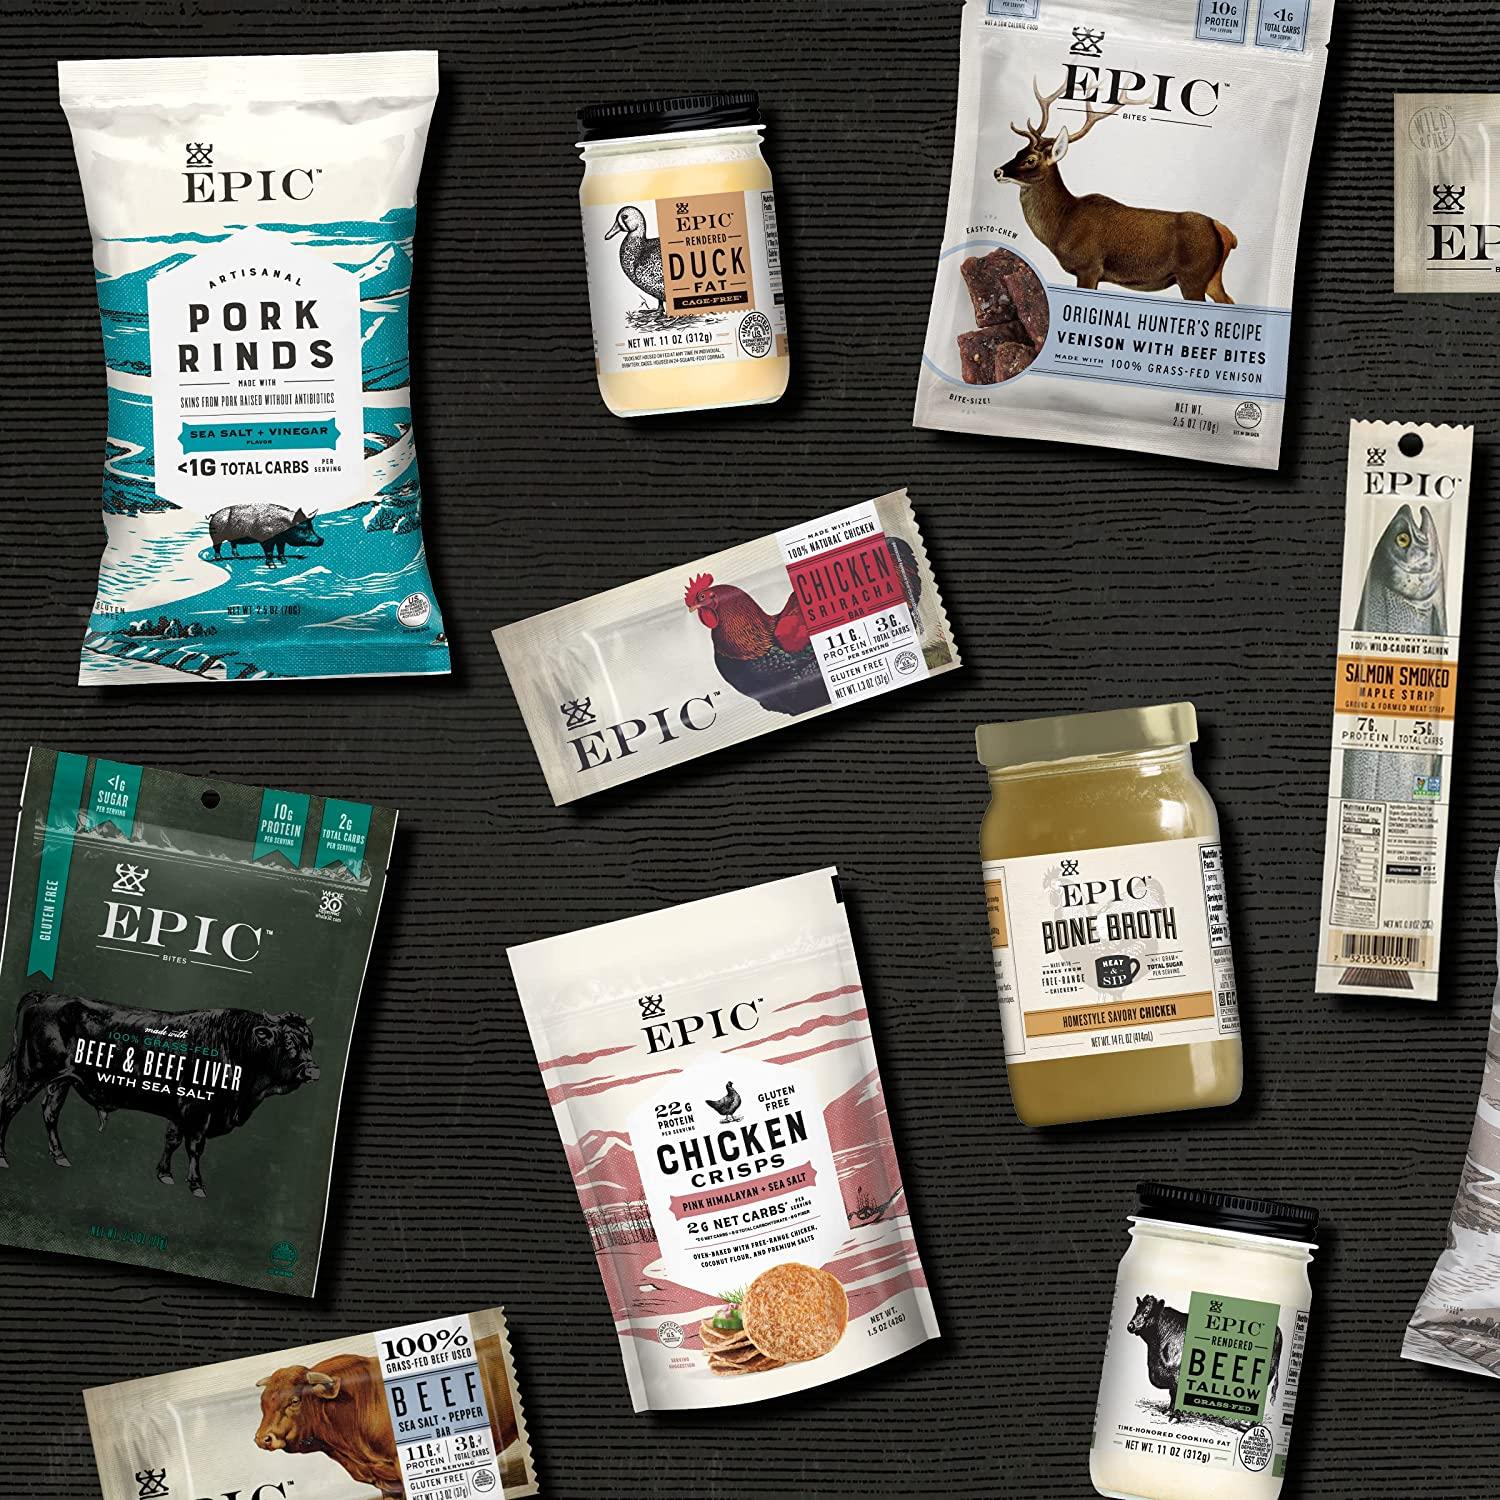 Epic Provisions Meat Bar Review: a Paleo-Friendly, Protein-Packed